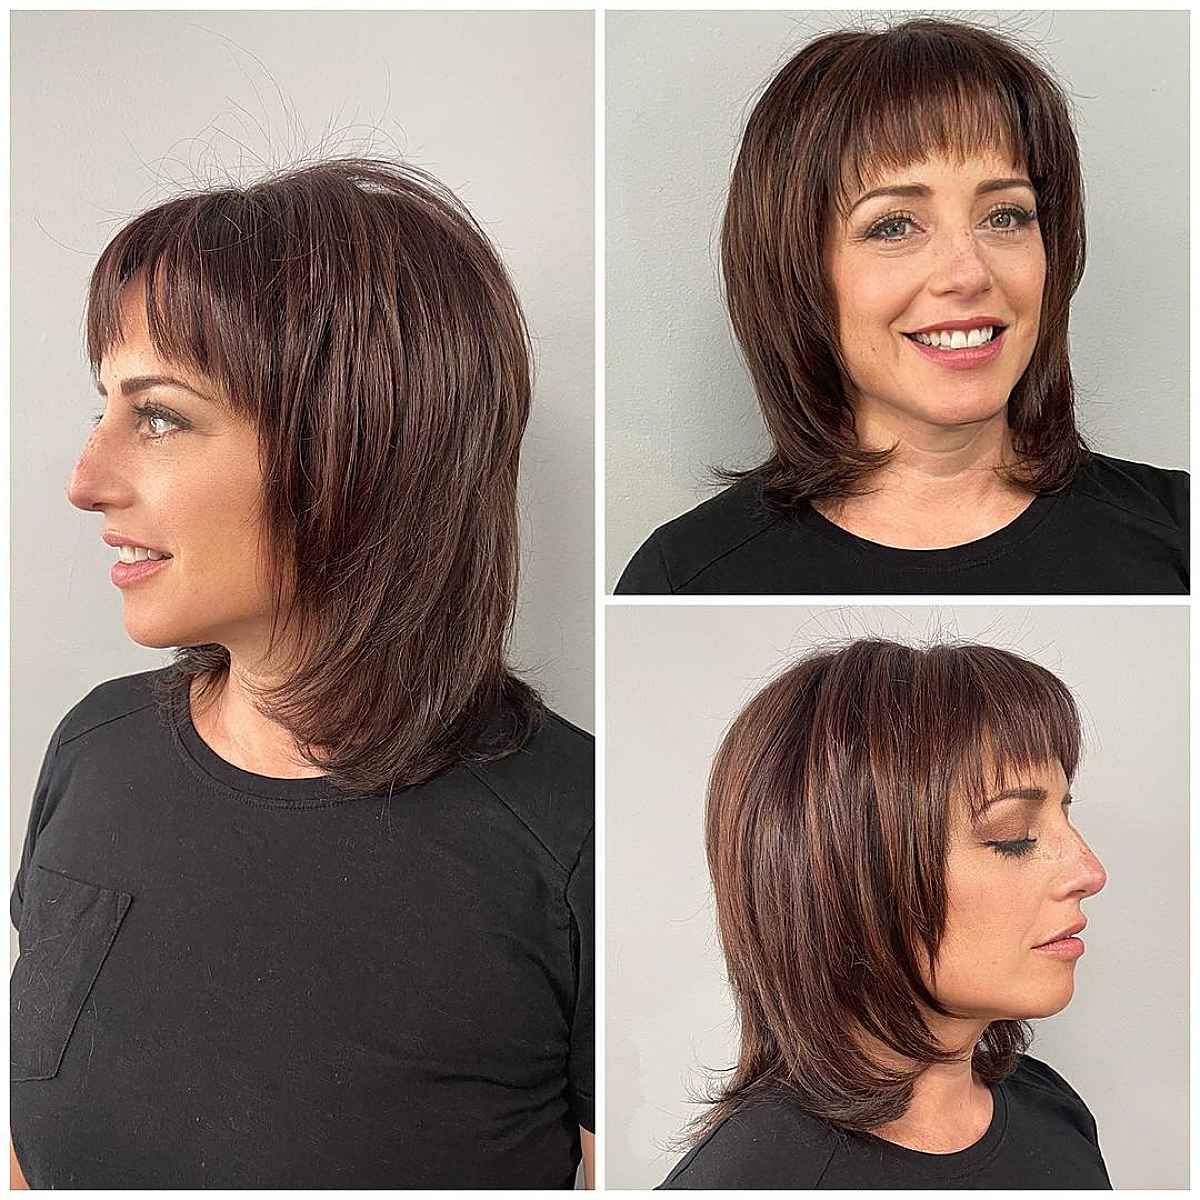 51 Low Maintenance Shaggy Haircuts With Bangs For Busy & Trendy Women Within Popular Low Maintenance Shag For Thin Hair (Gallery 3 of 15)